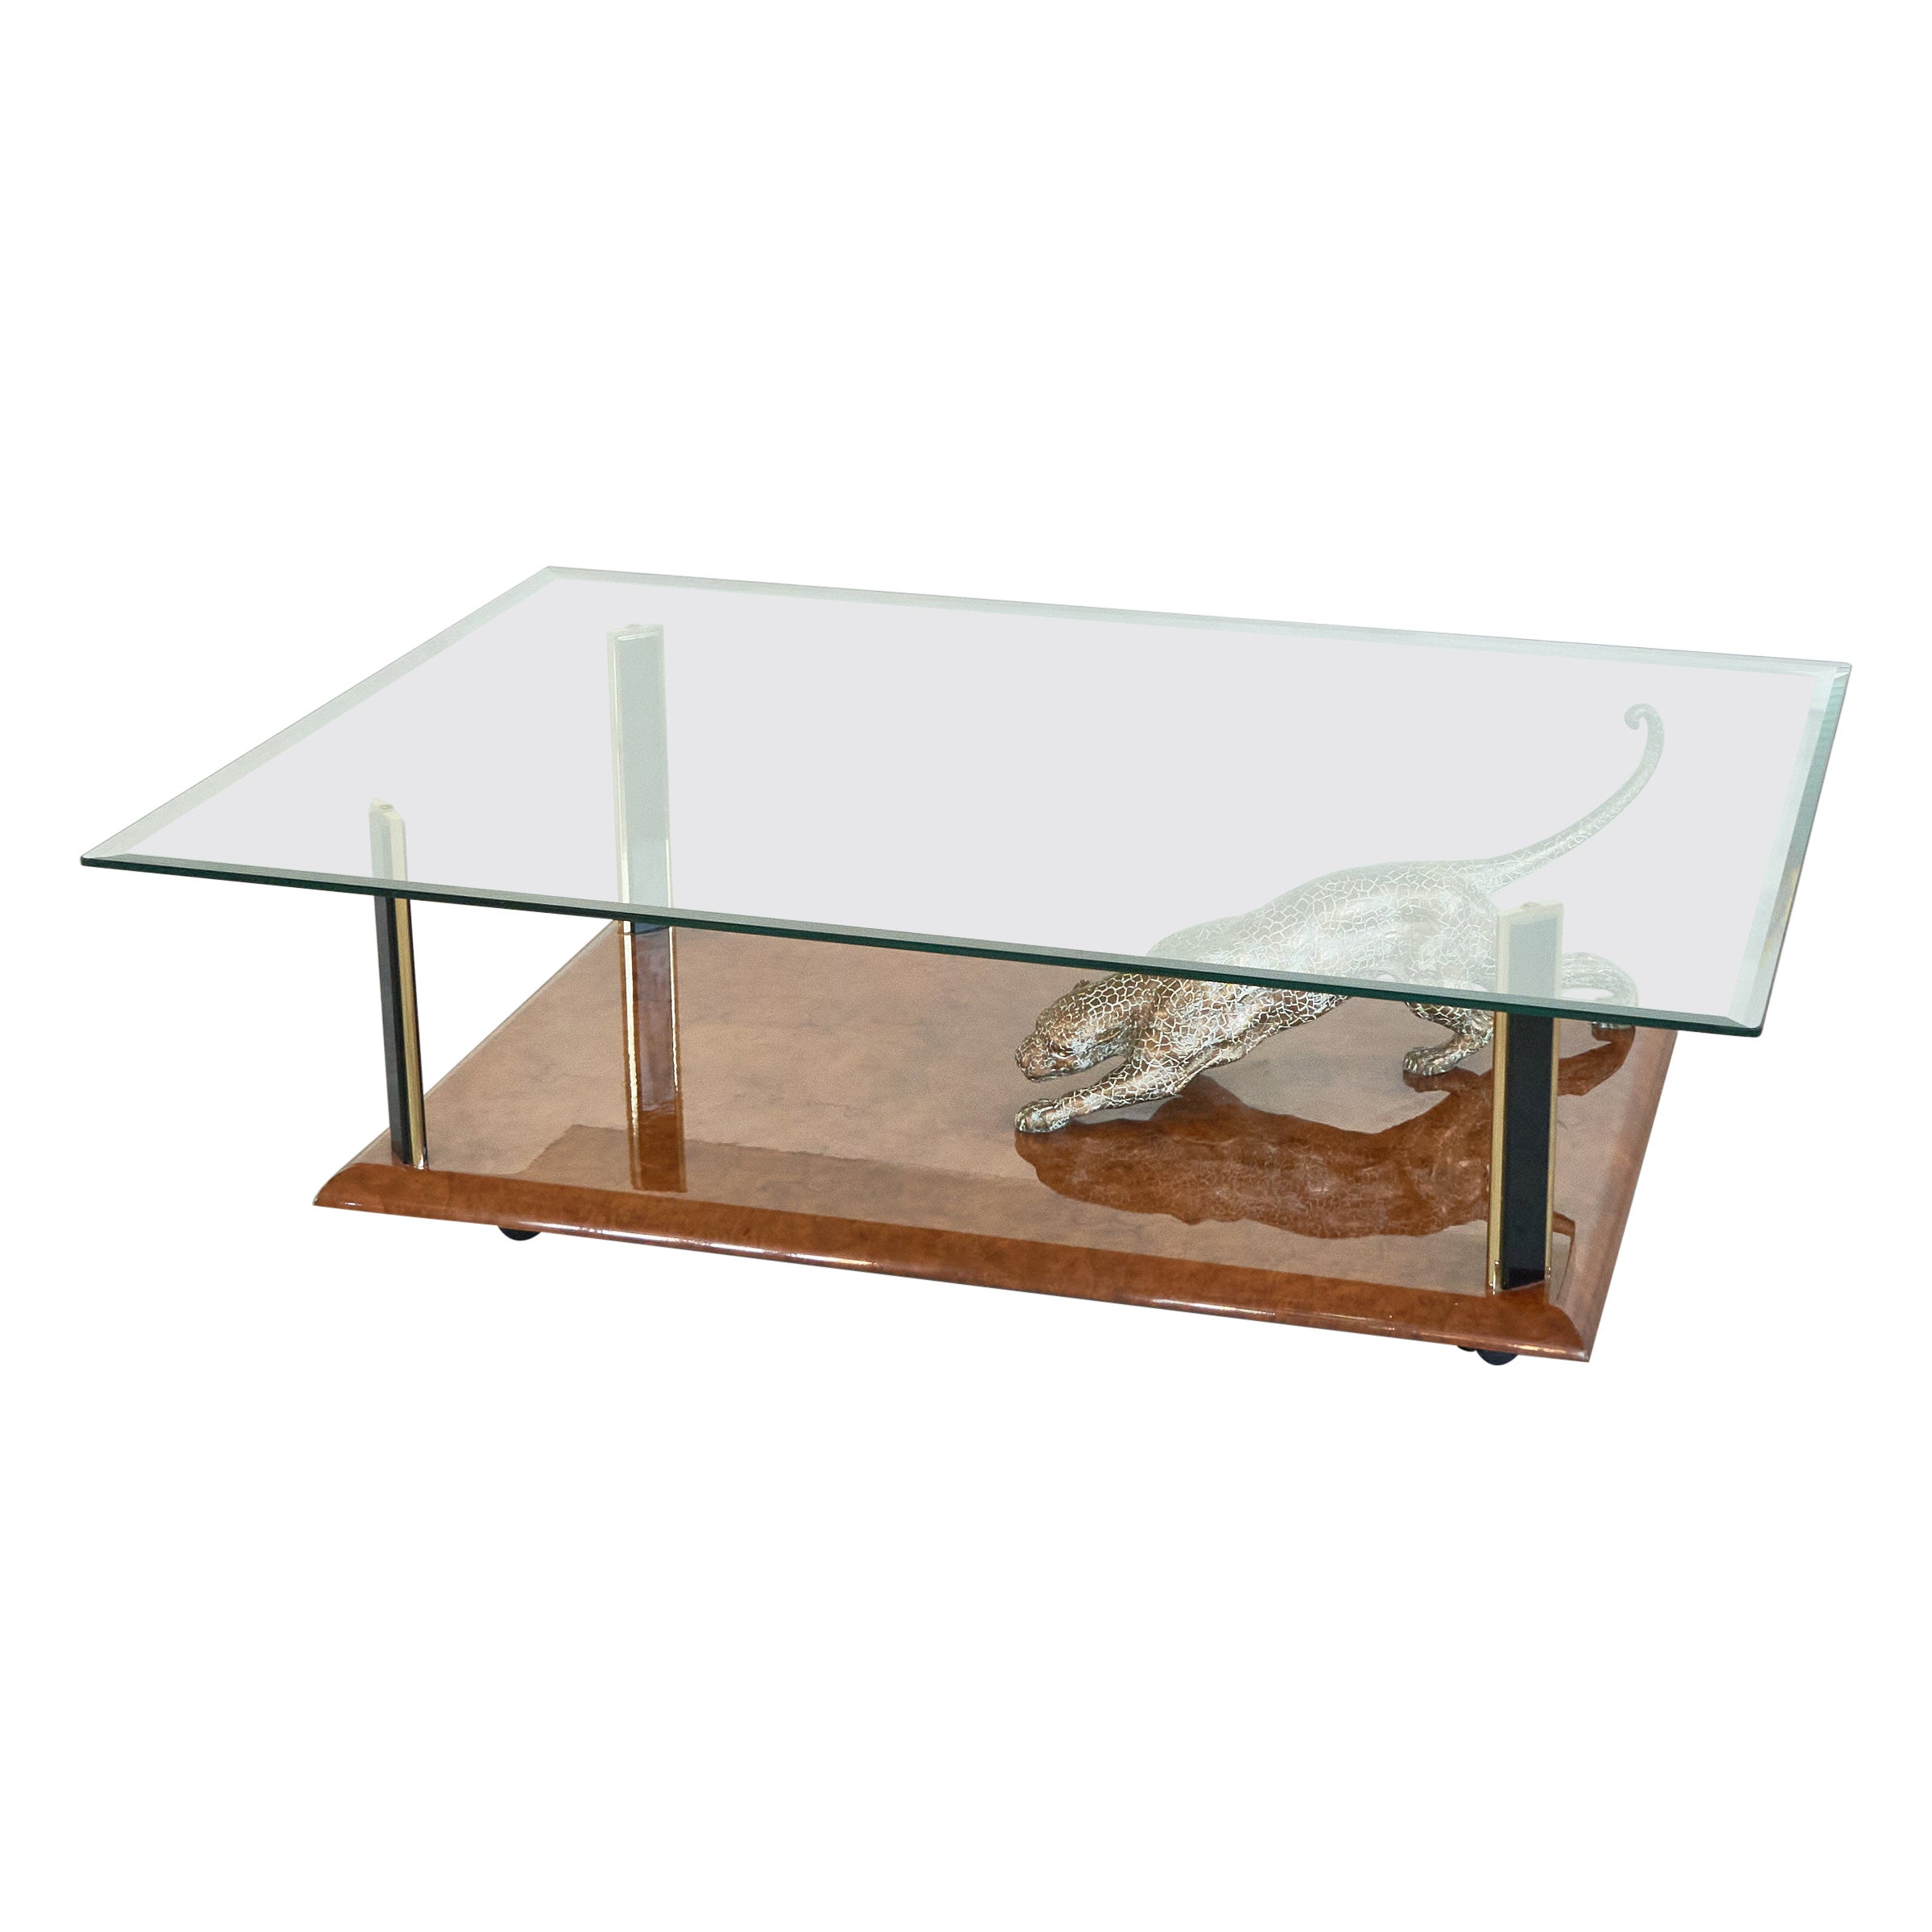 Nicola Voci 'Jaguar' Coffee Table in Bronze, Burl Wood and Beveled Glass 1970s For Sale